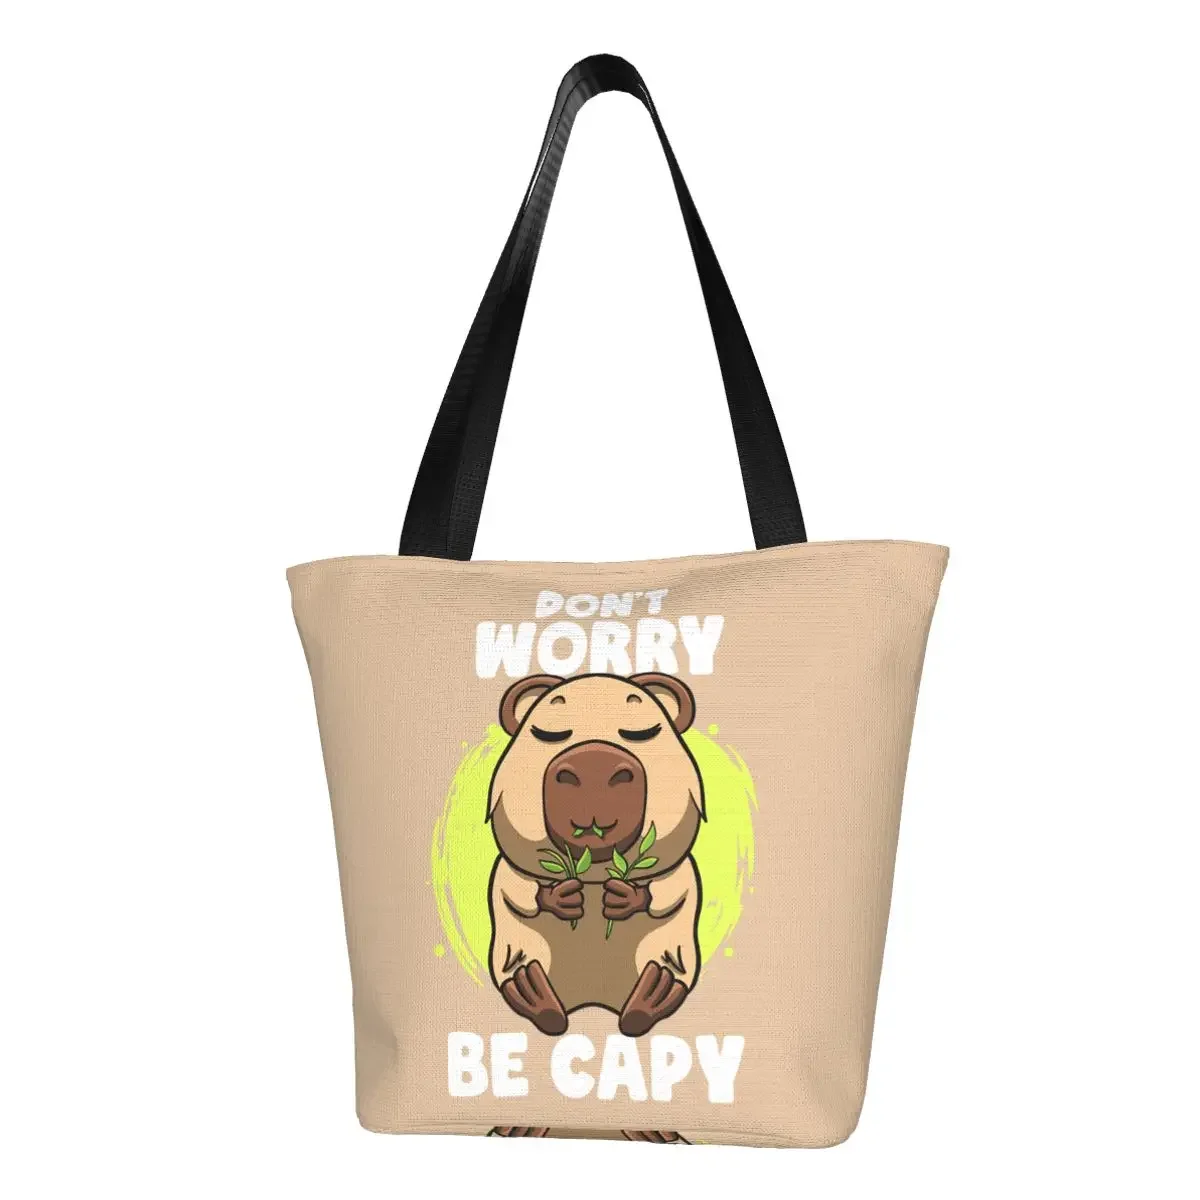 

Funny Funny Capybara Face Shopping Tote Bags Reusable Don't Worry Be Capy Grocery Canvas Shoulder Shopper Bag